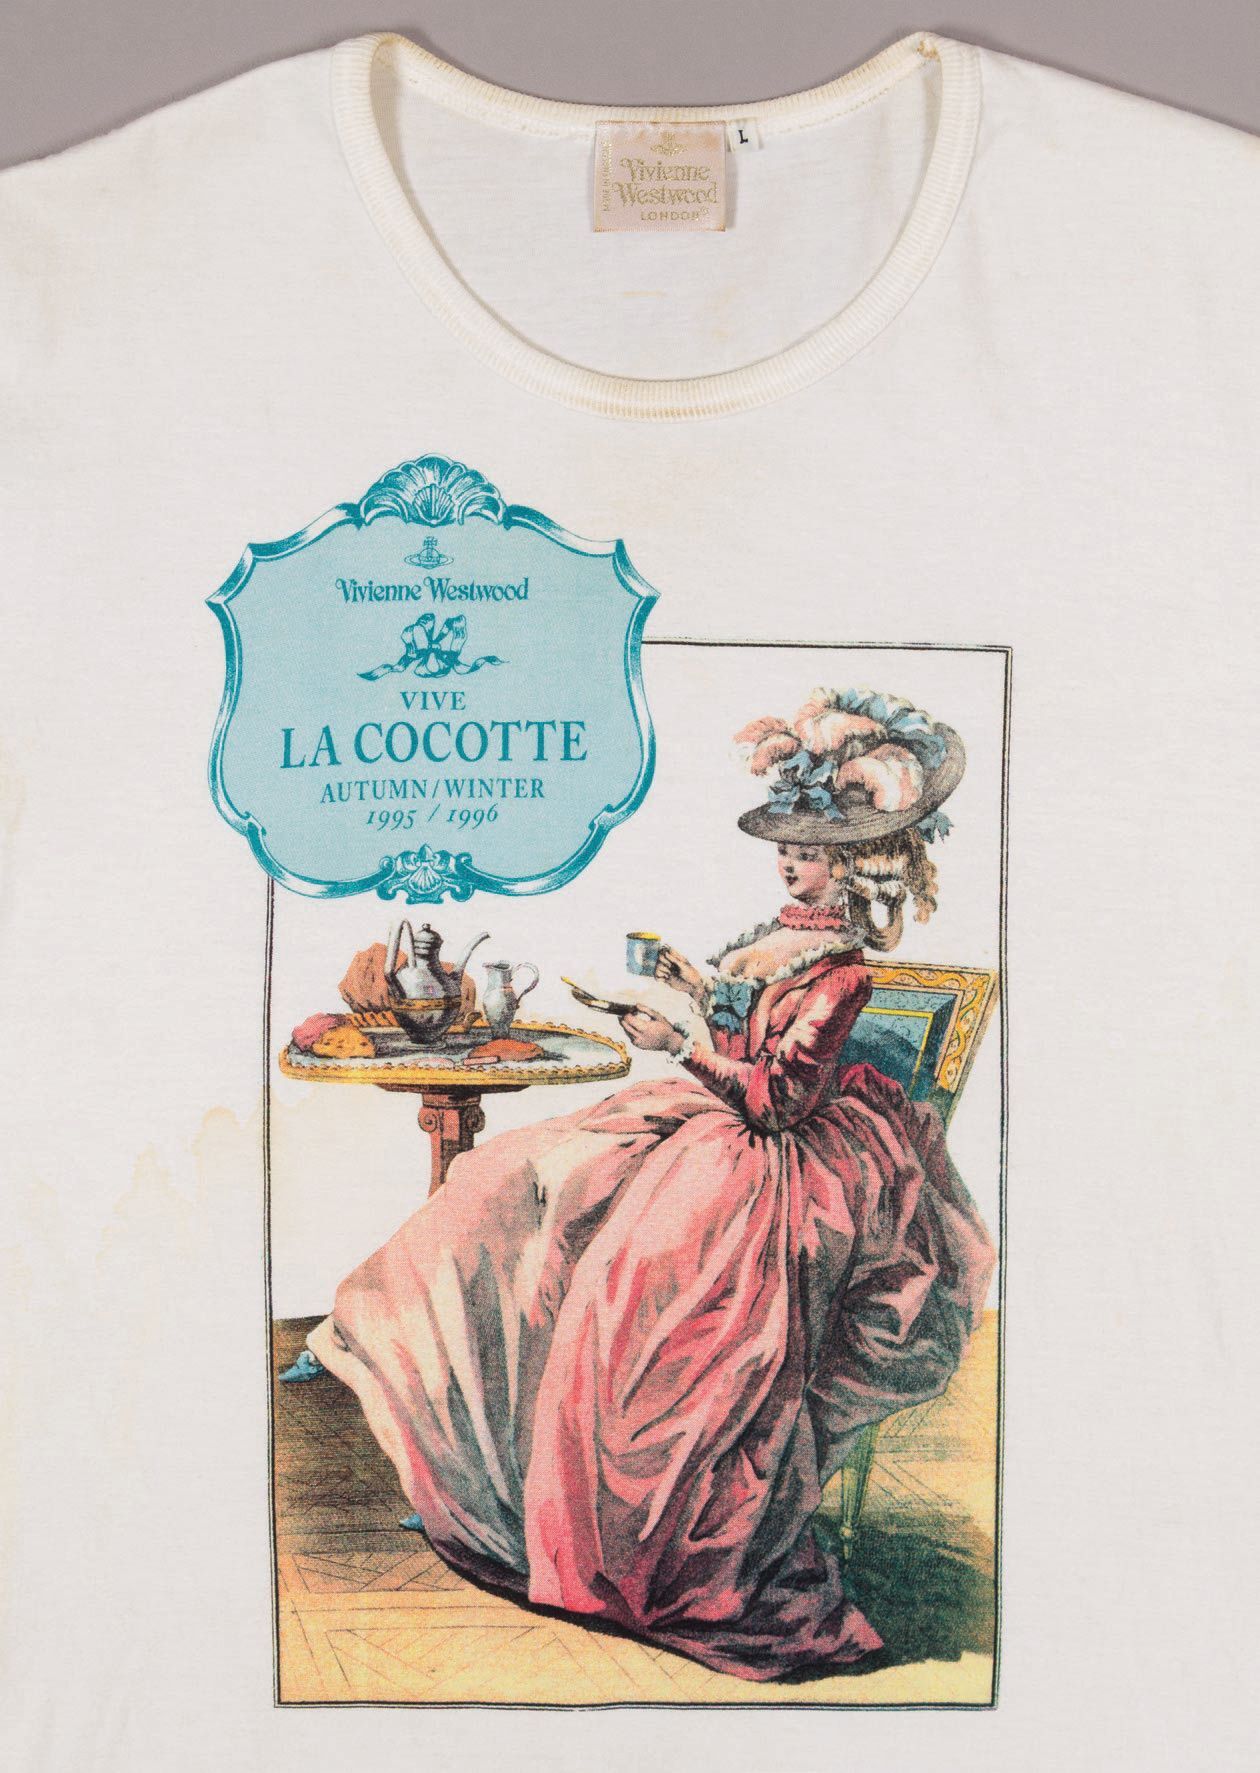 Vivienne Westwood, “Vive La Cocotte” T-shirt, fall 1995 PHOTO: GIFT OF TIMOTHY REUKAUF, STYLIST/© THE MUSEUM AT FIT